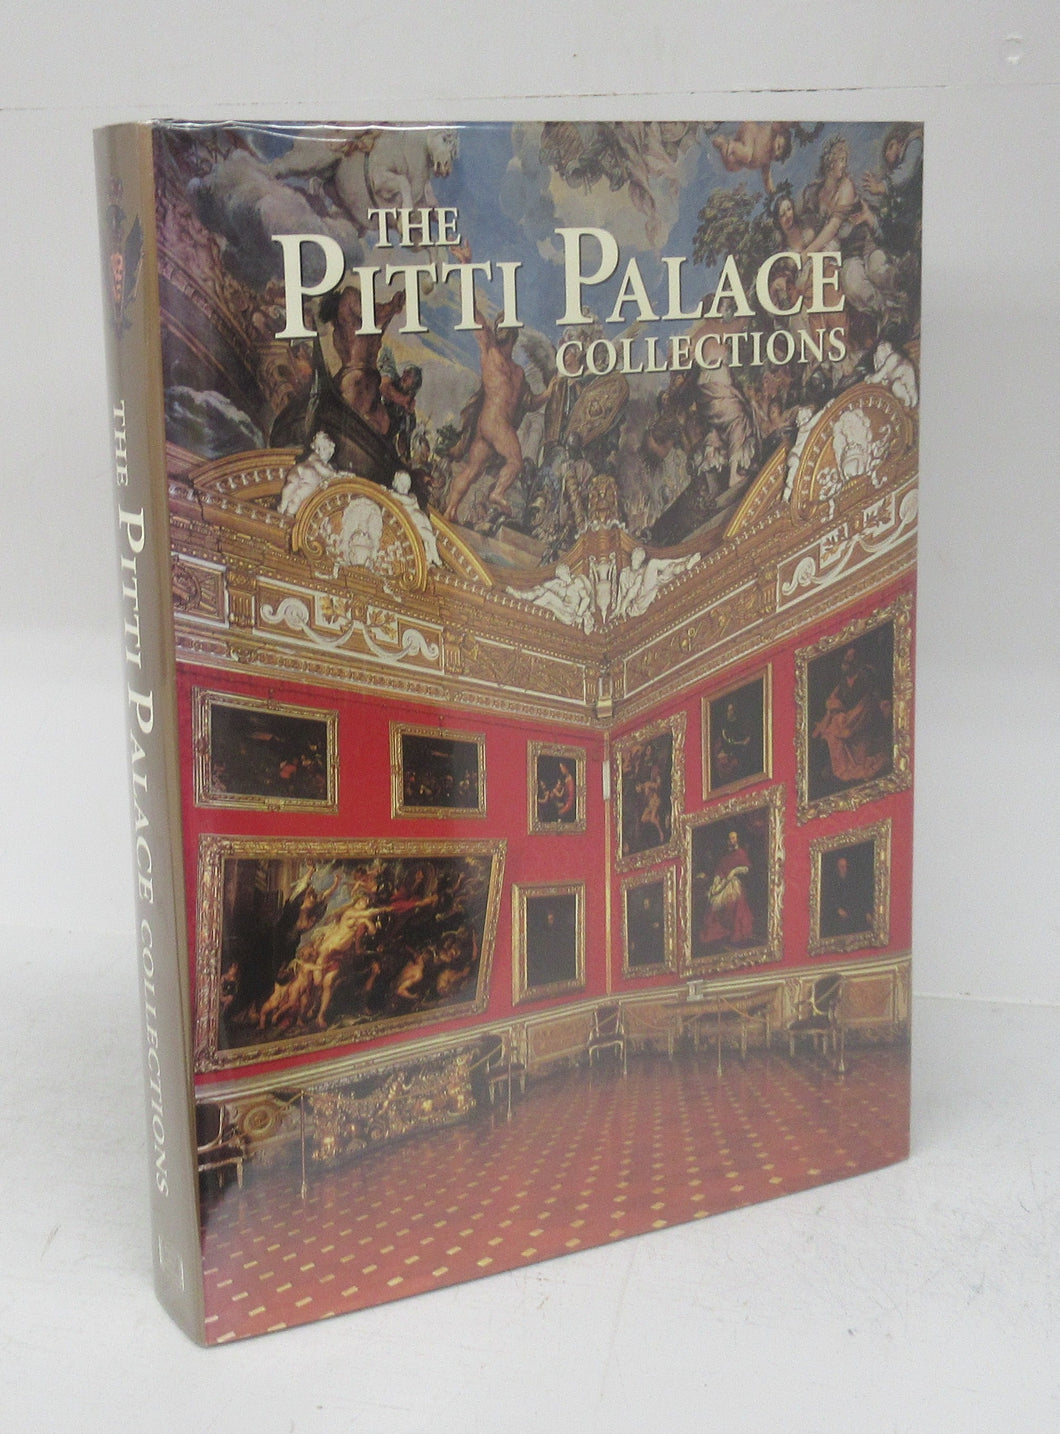 The Pitti Palace Collections